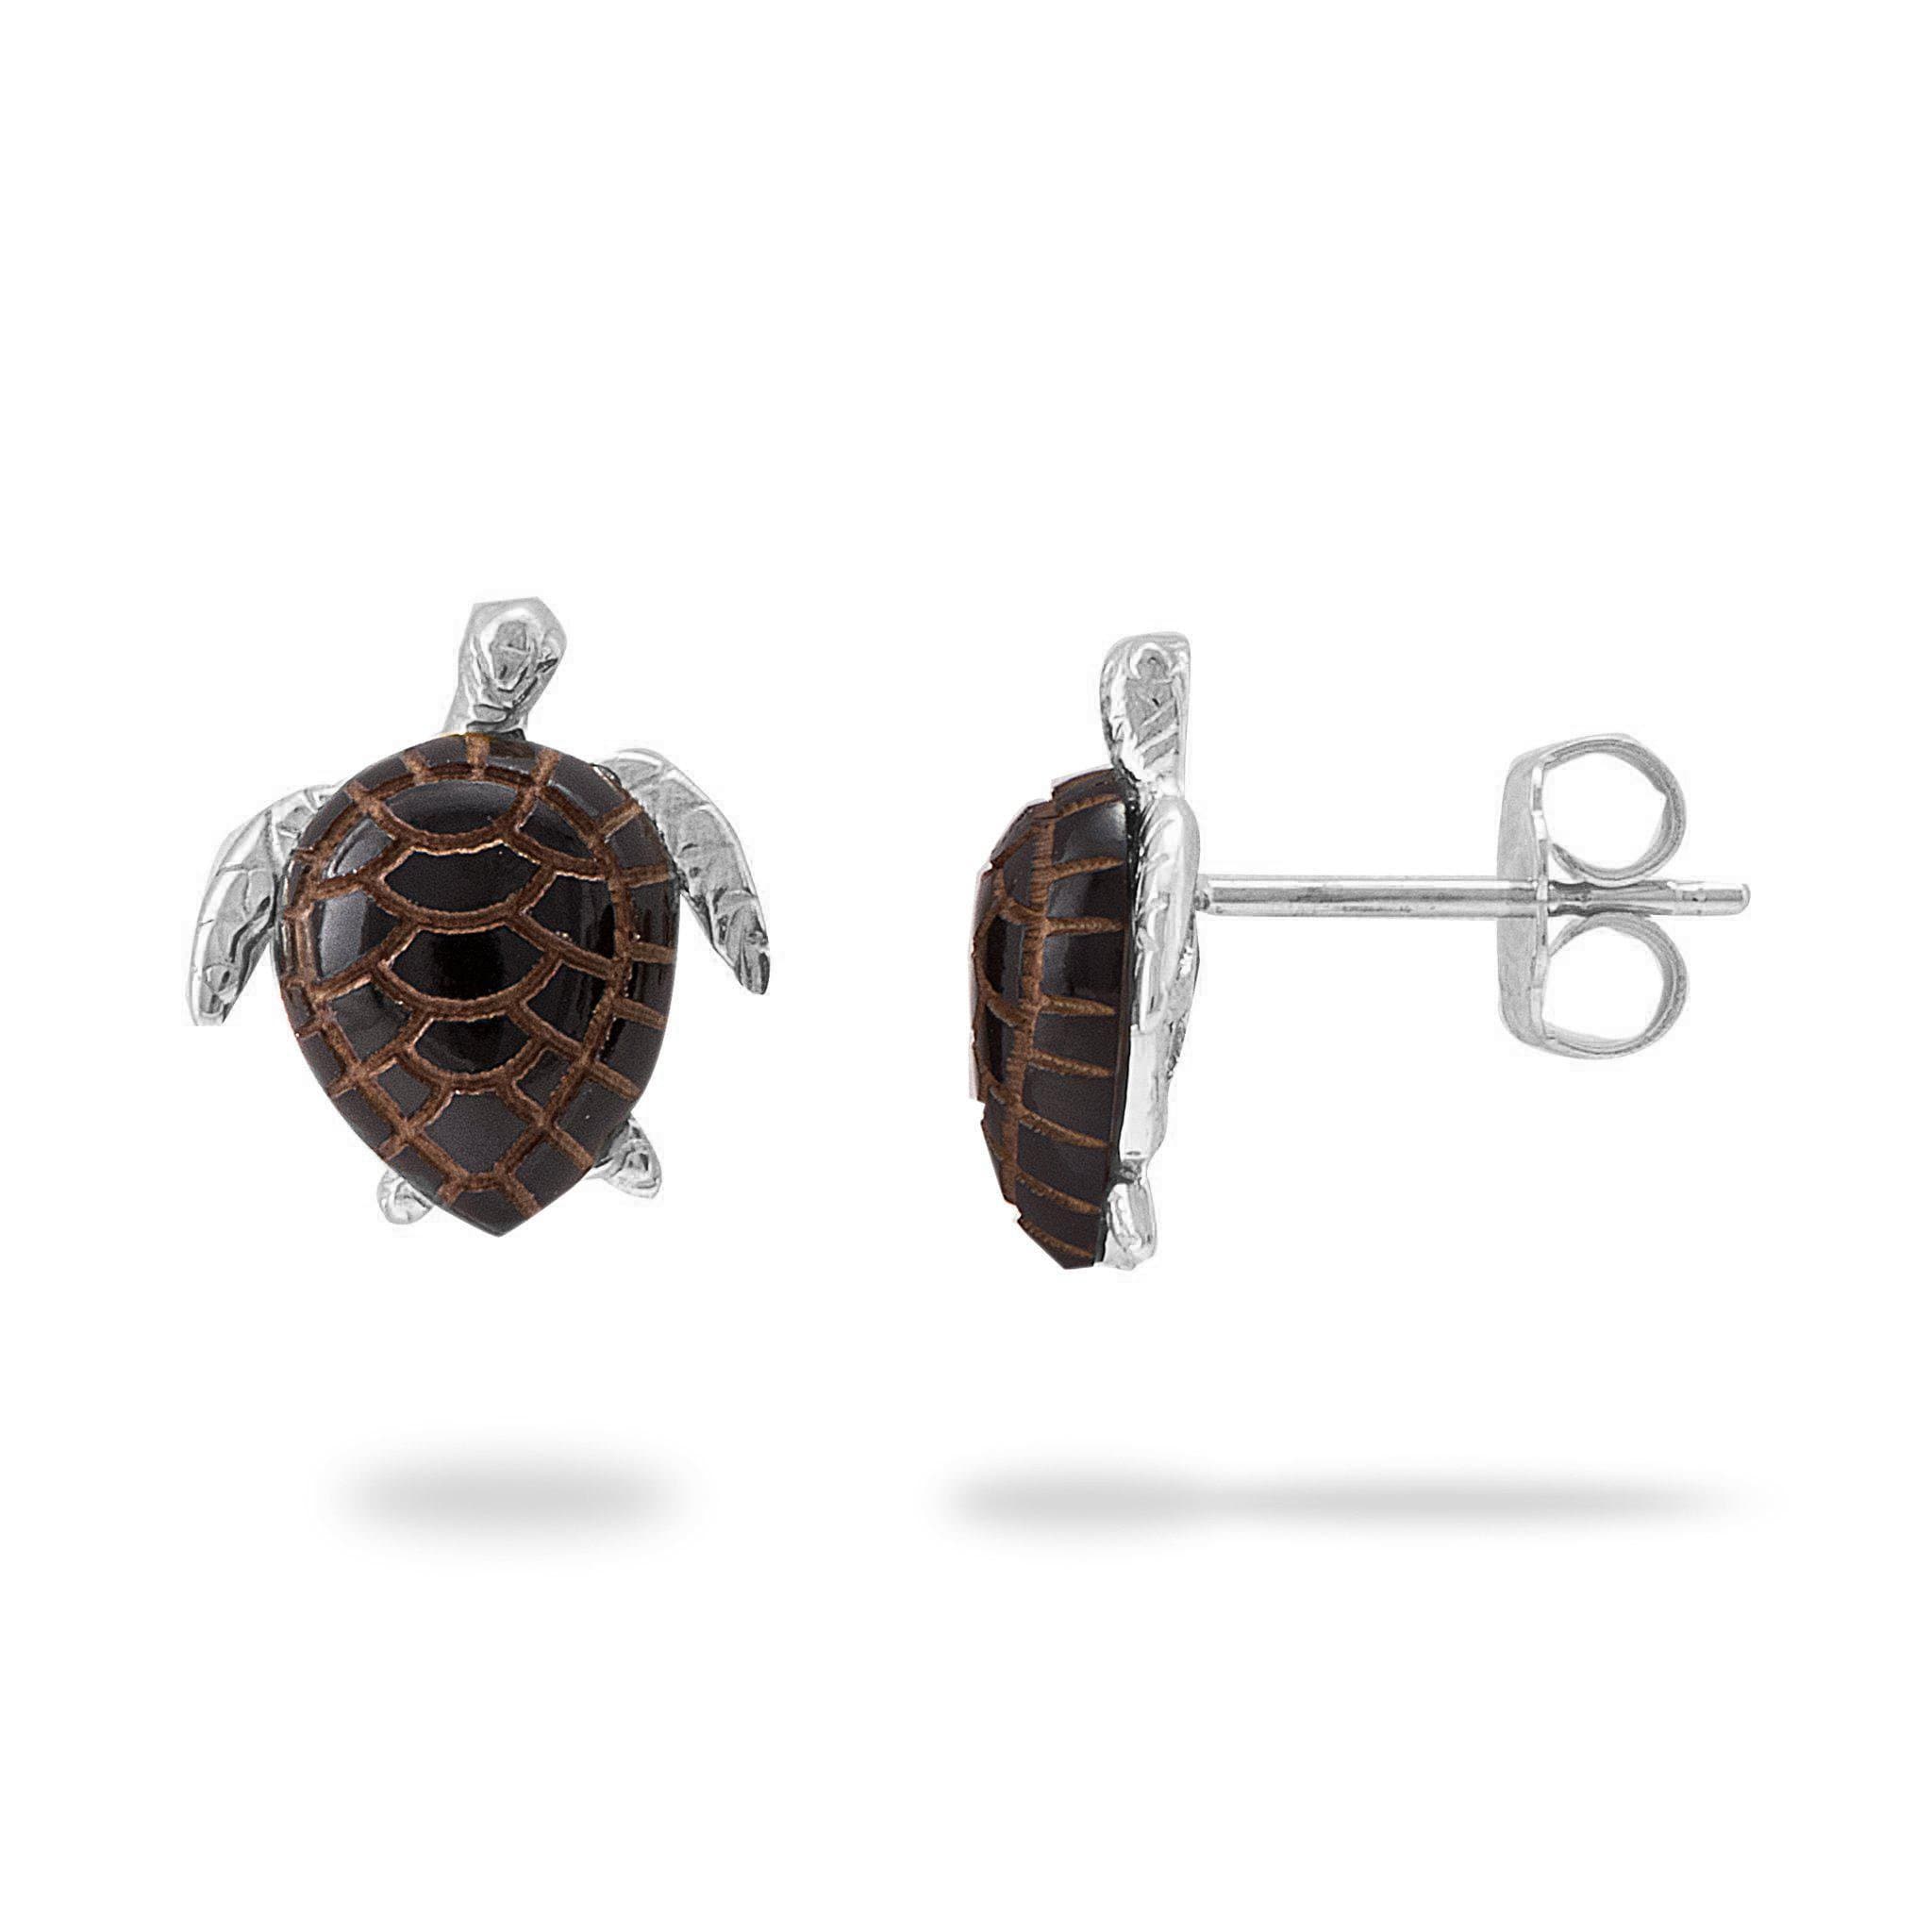 Honu Black Coral Earrings in White Gold - 12mm-Maui Divers Jewelry